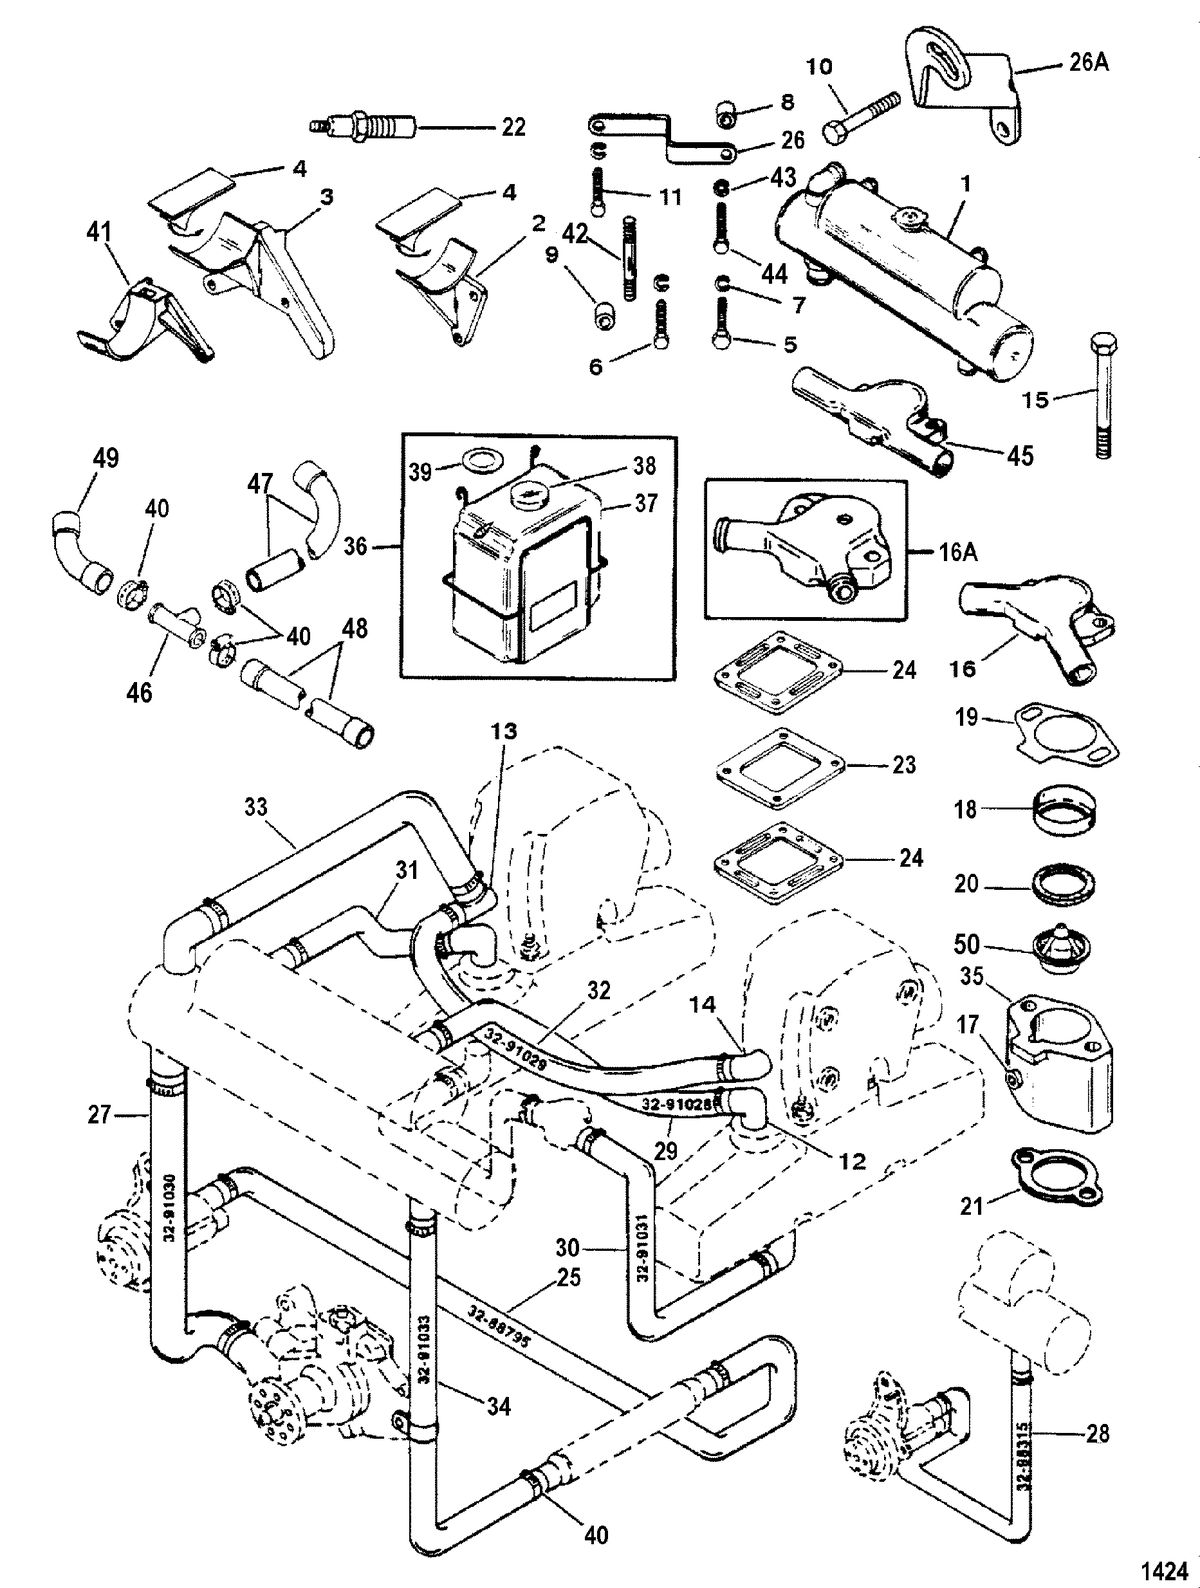 ACCESSORIES EXHAUST/COOLING SYSTEMS AND EXTENSION KITS Closed Cooling System(91036A1 / A5 / A8)